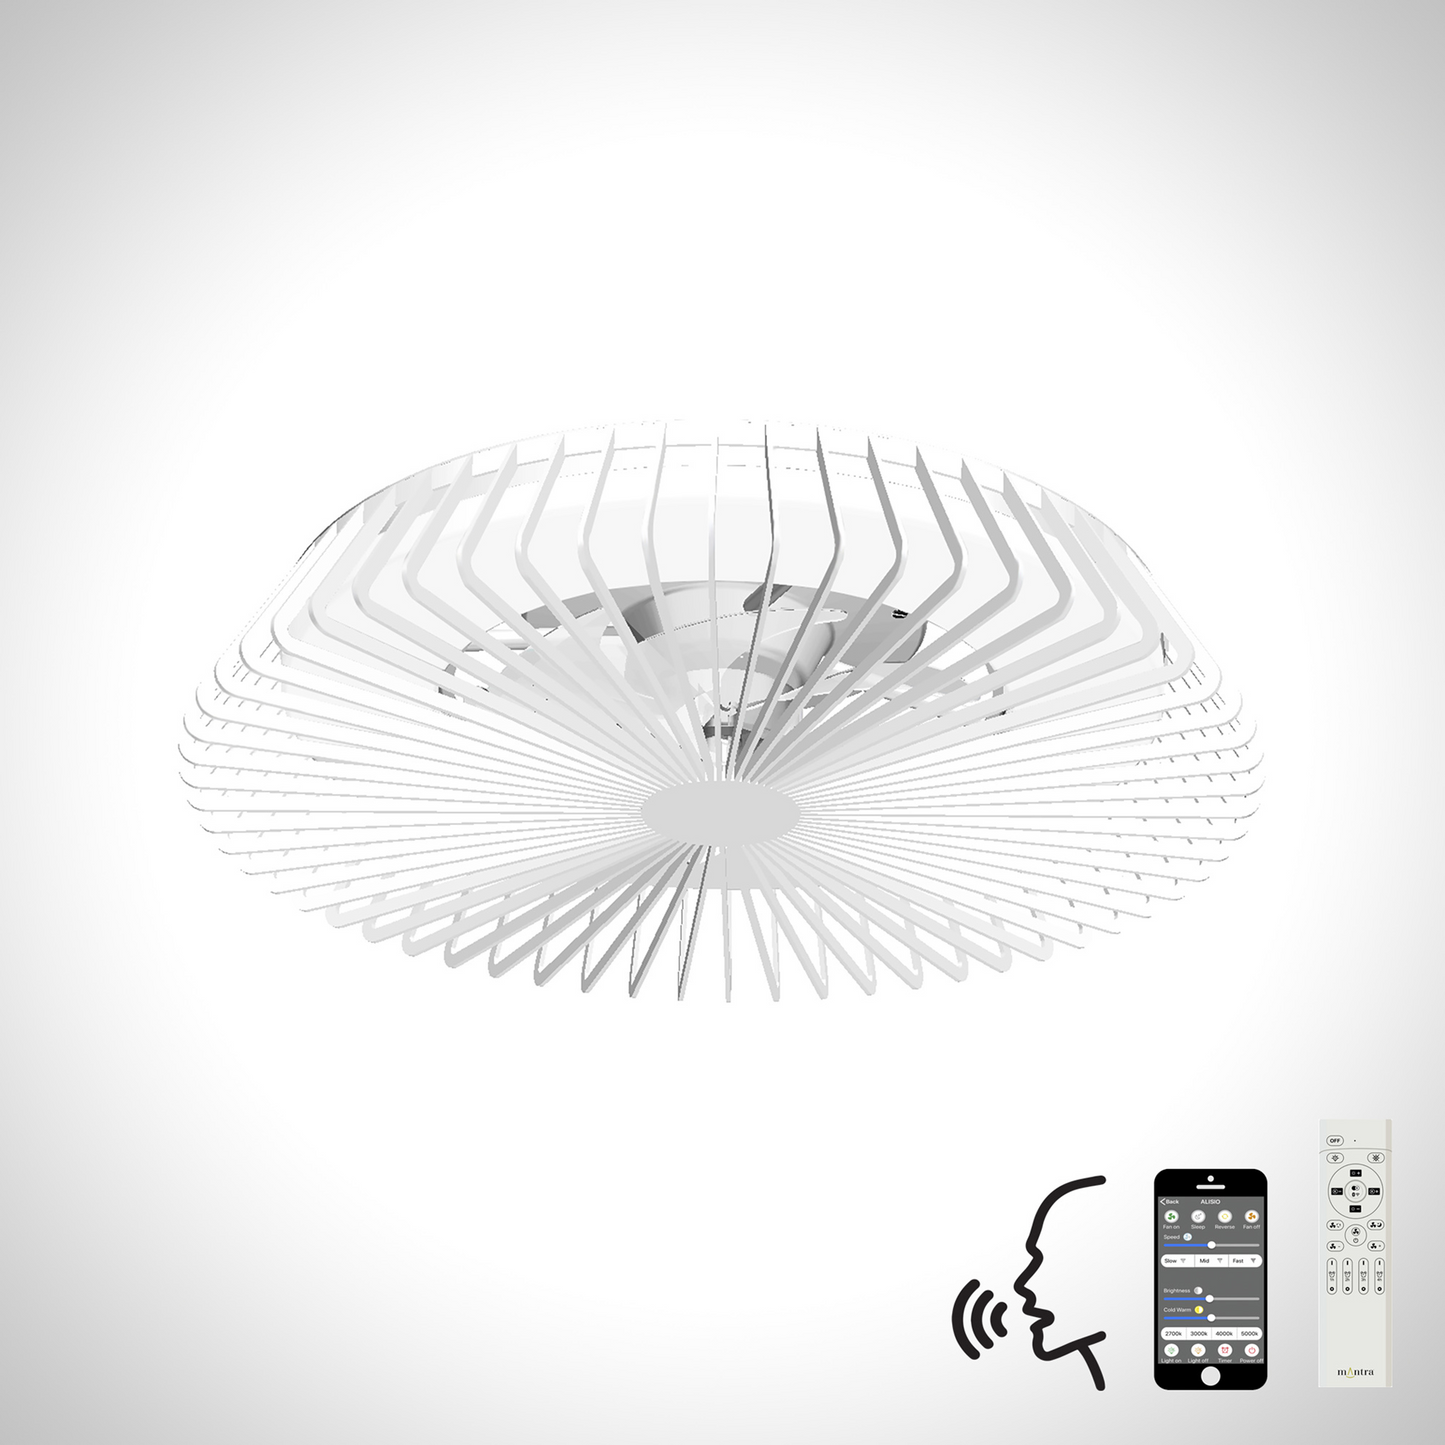 Himalaya LED Dimmable Ceiling Light With Built-In Fan - Remote Control, APP & Alexa/Google Voice Control,